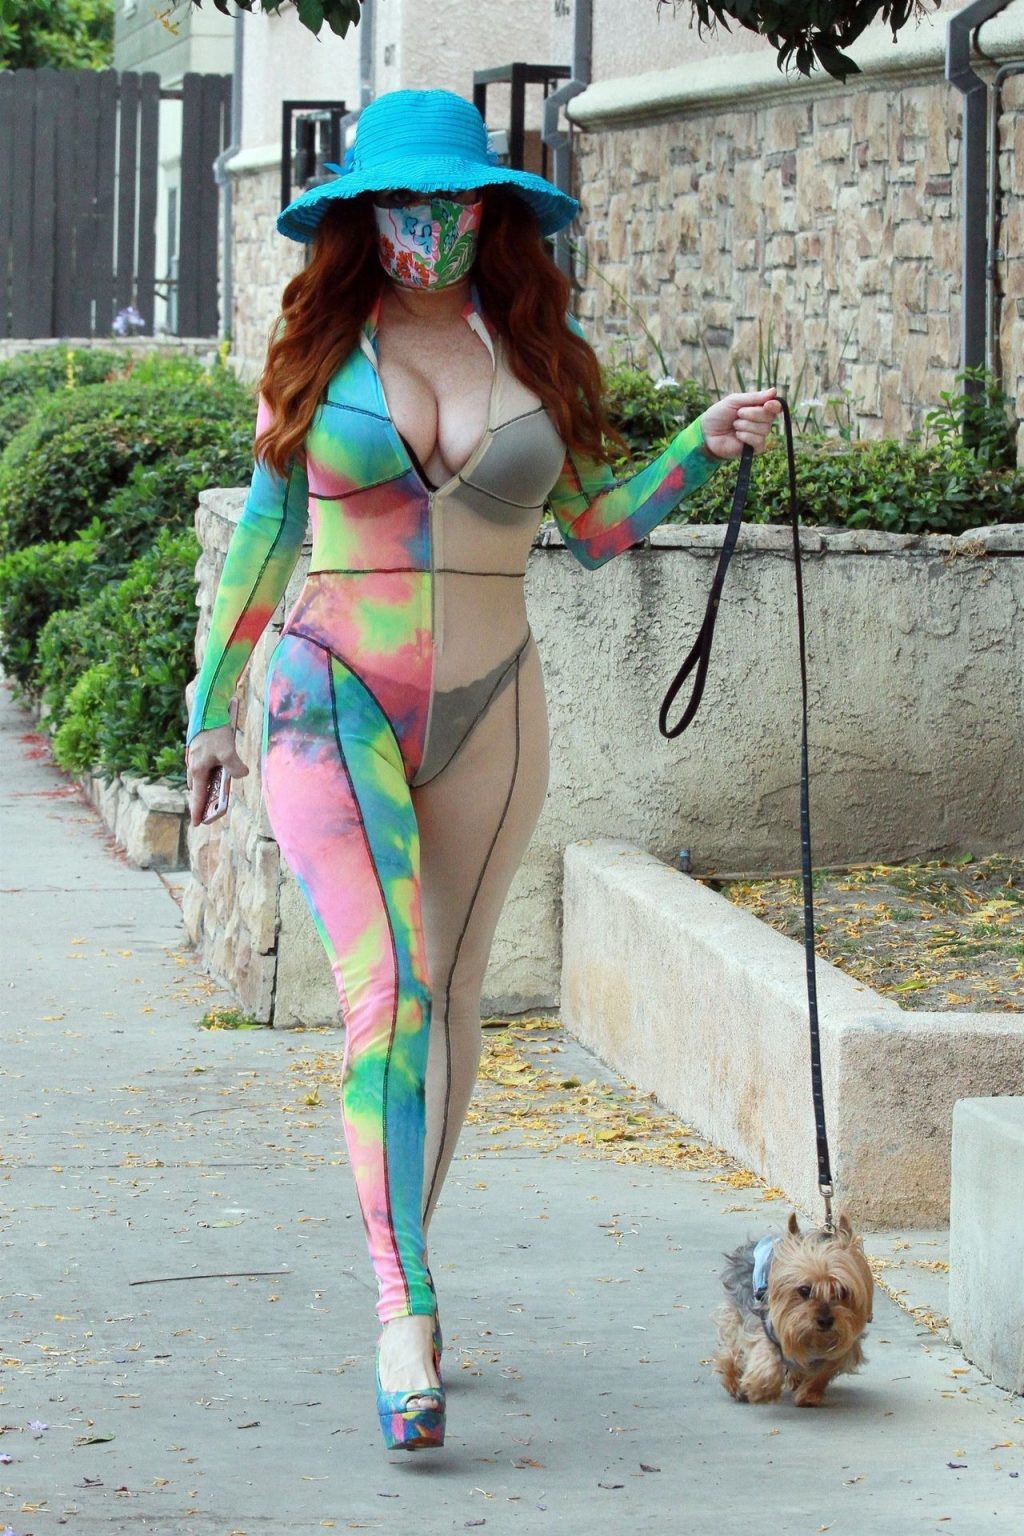 Phoebe Price Wears a Colorful Outfit to Walk Her Dog (20 Photos)